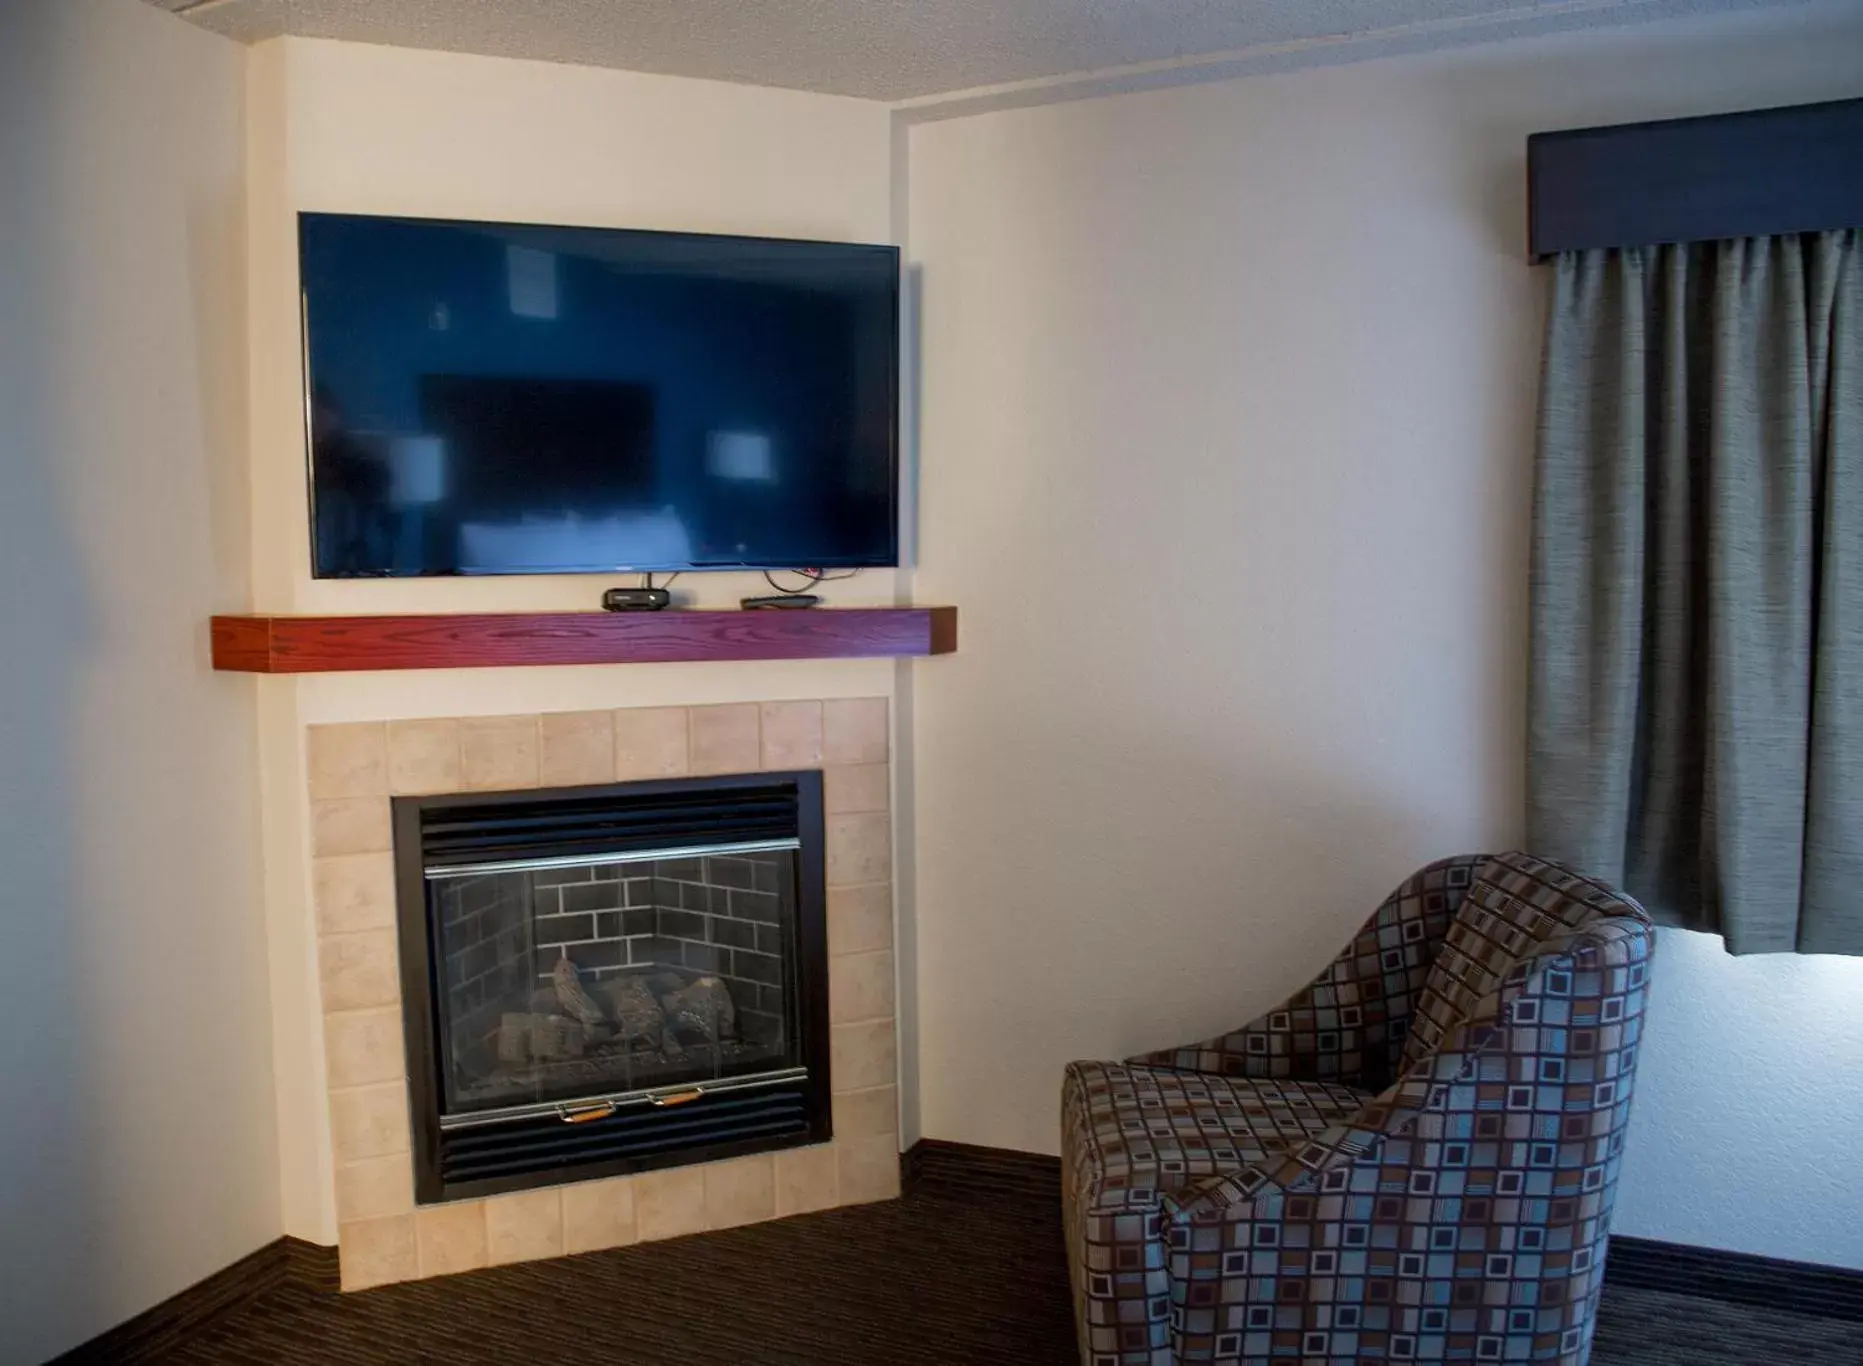 Decorative detail, TV/Entertainment Center in AmericInn by Wyndham Mounds View Minneapolis